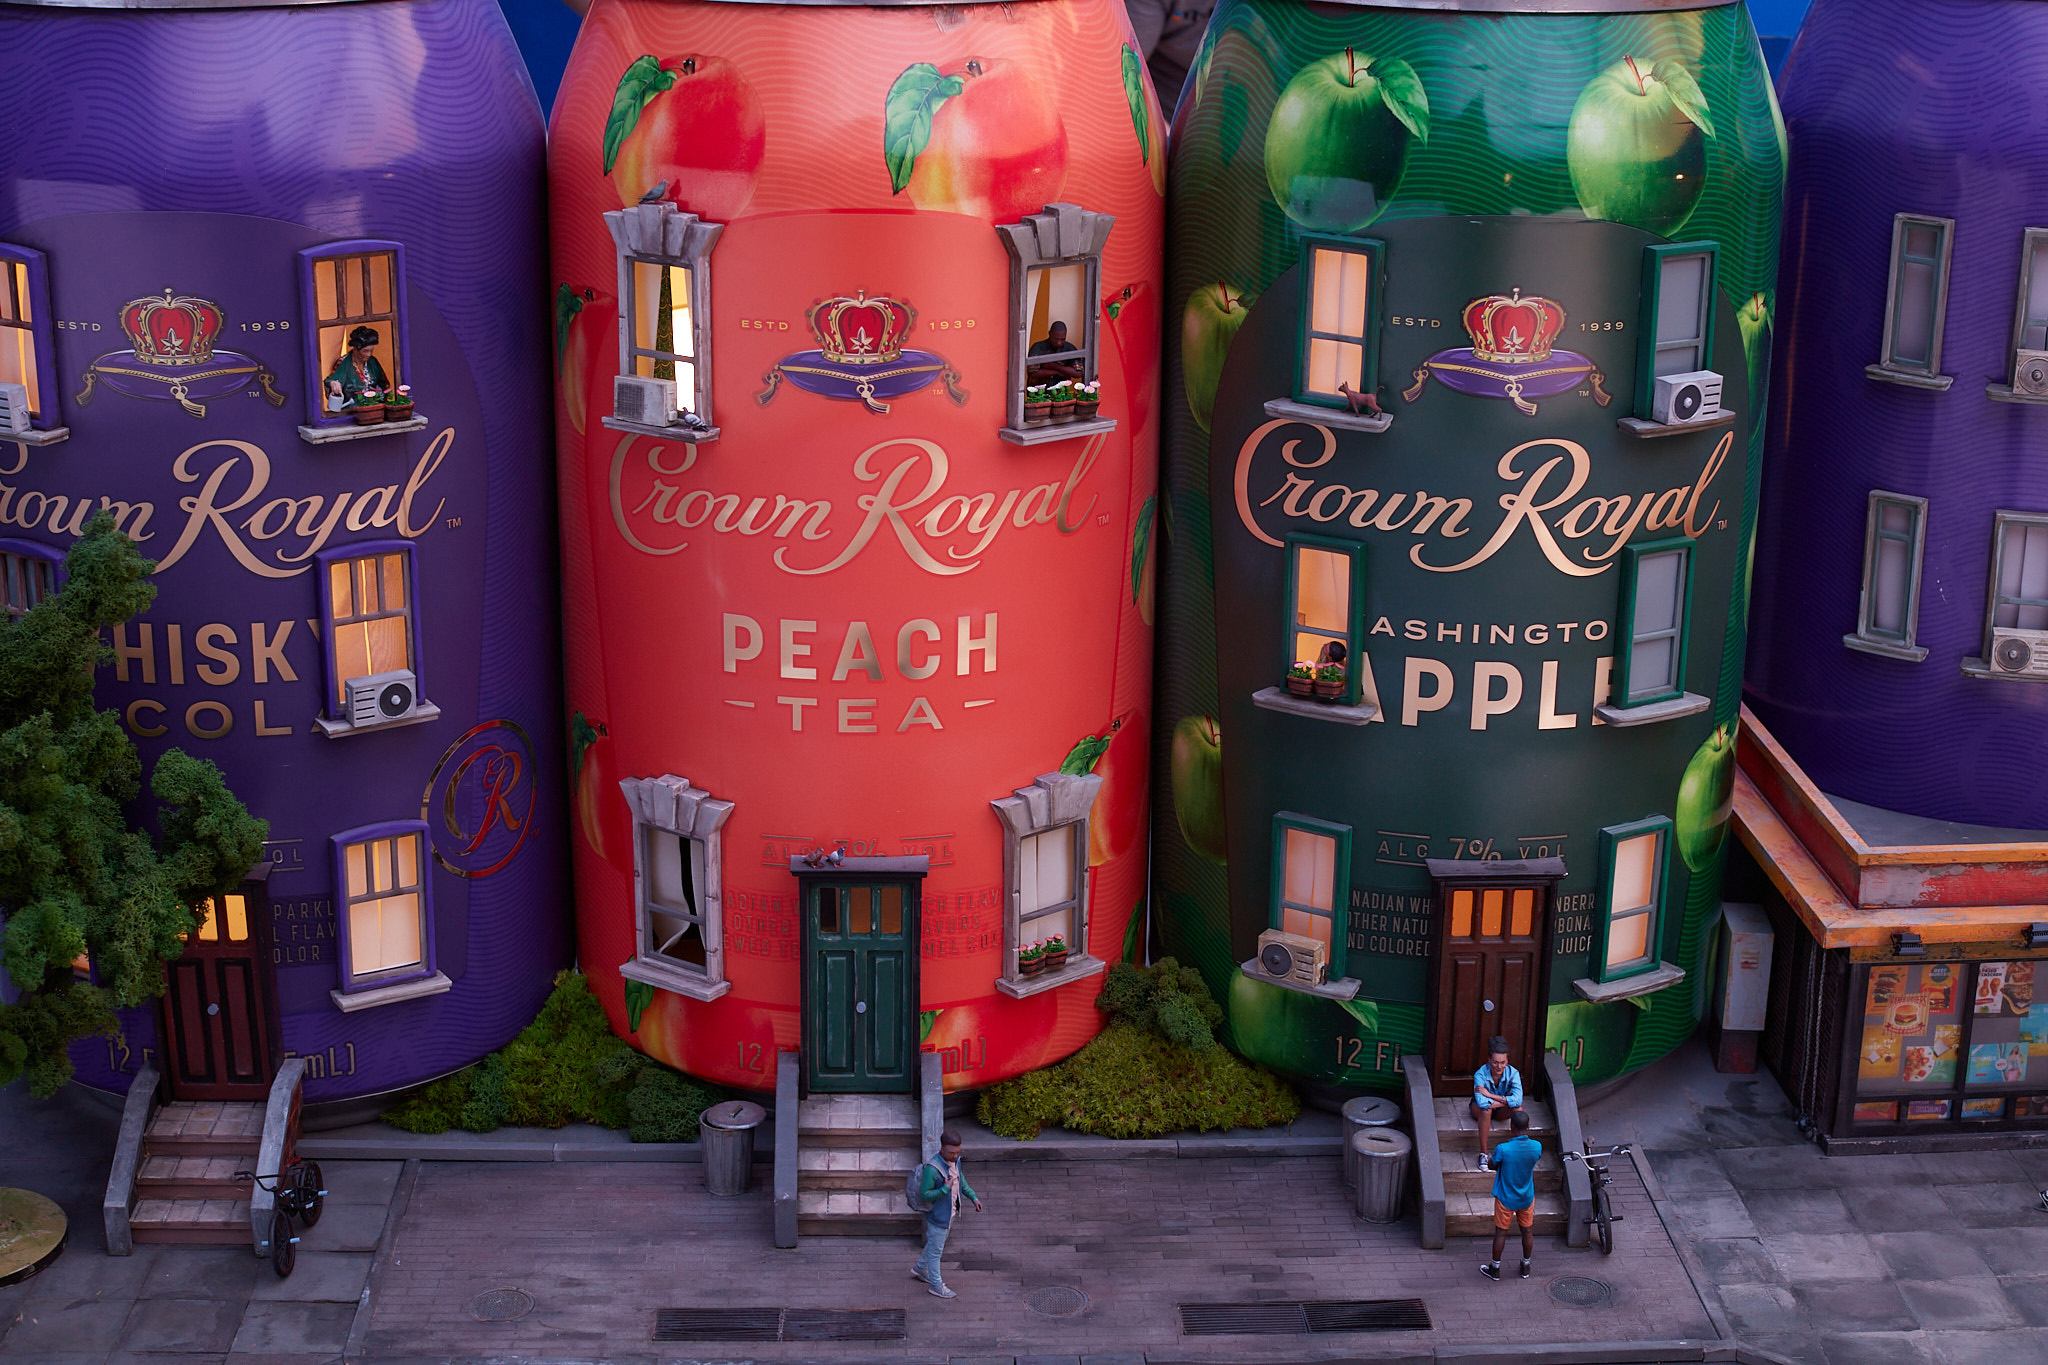 With three award-winning flavors, consumers 21+ can choose from Washington Apple featuring Crown Royal whisky, apple and sparkling cranberry flavors; Whisky & Cola featuring Crown Royal whisky and cola; and Peach Tea featuring Crown Royal whisky, peach flavor and brewed tea.